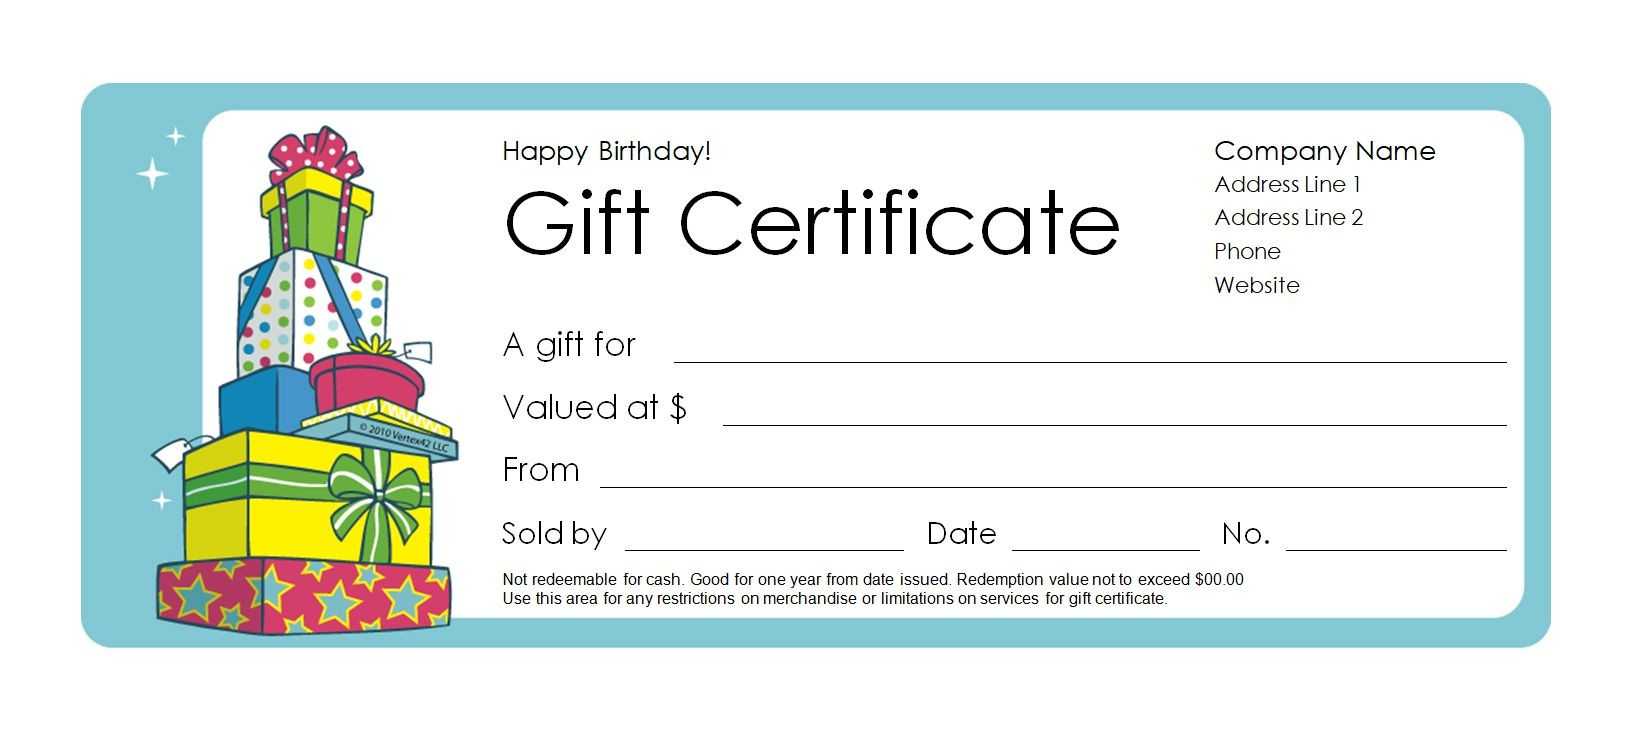 Fake Gift Certificate Template